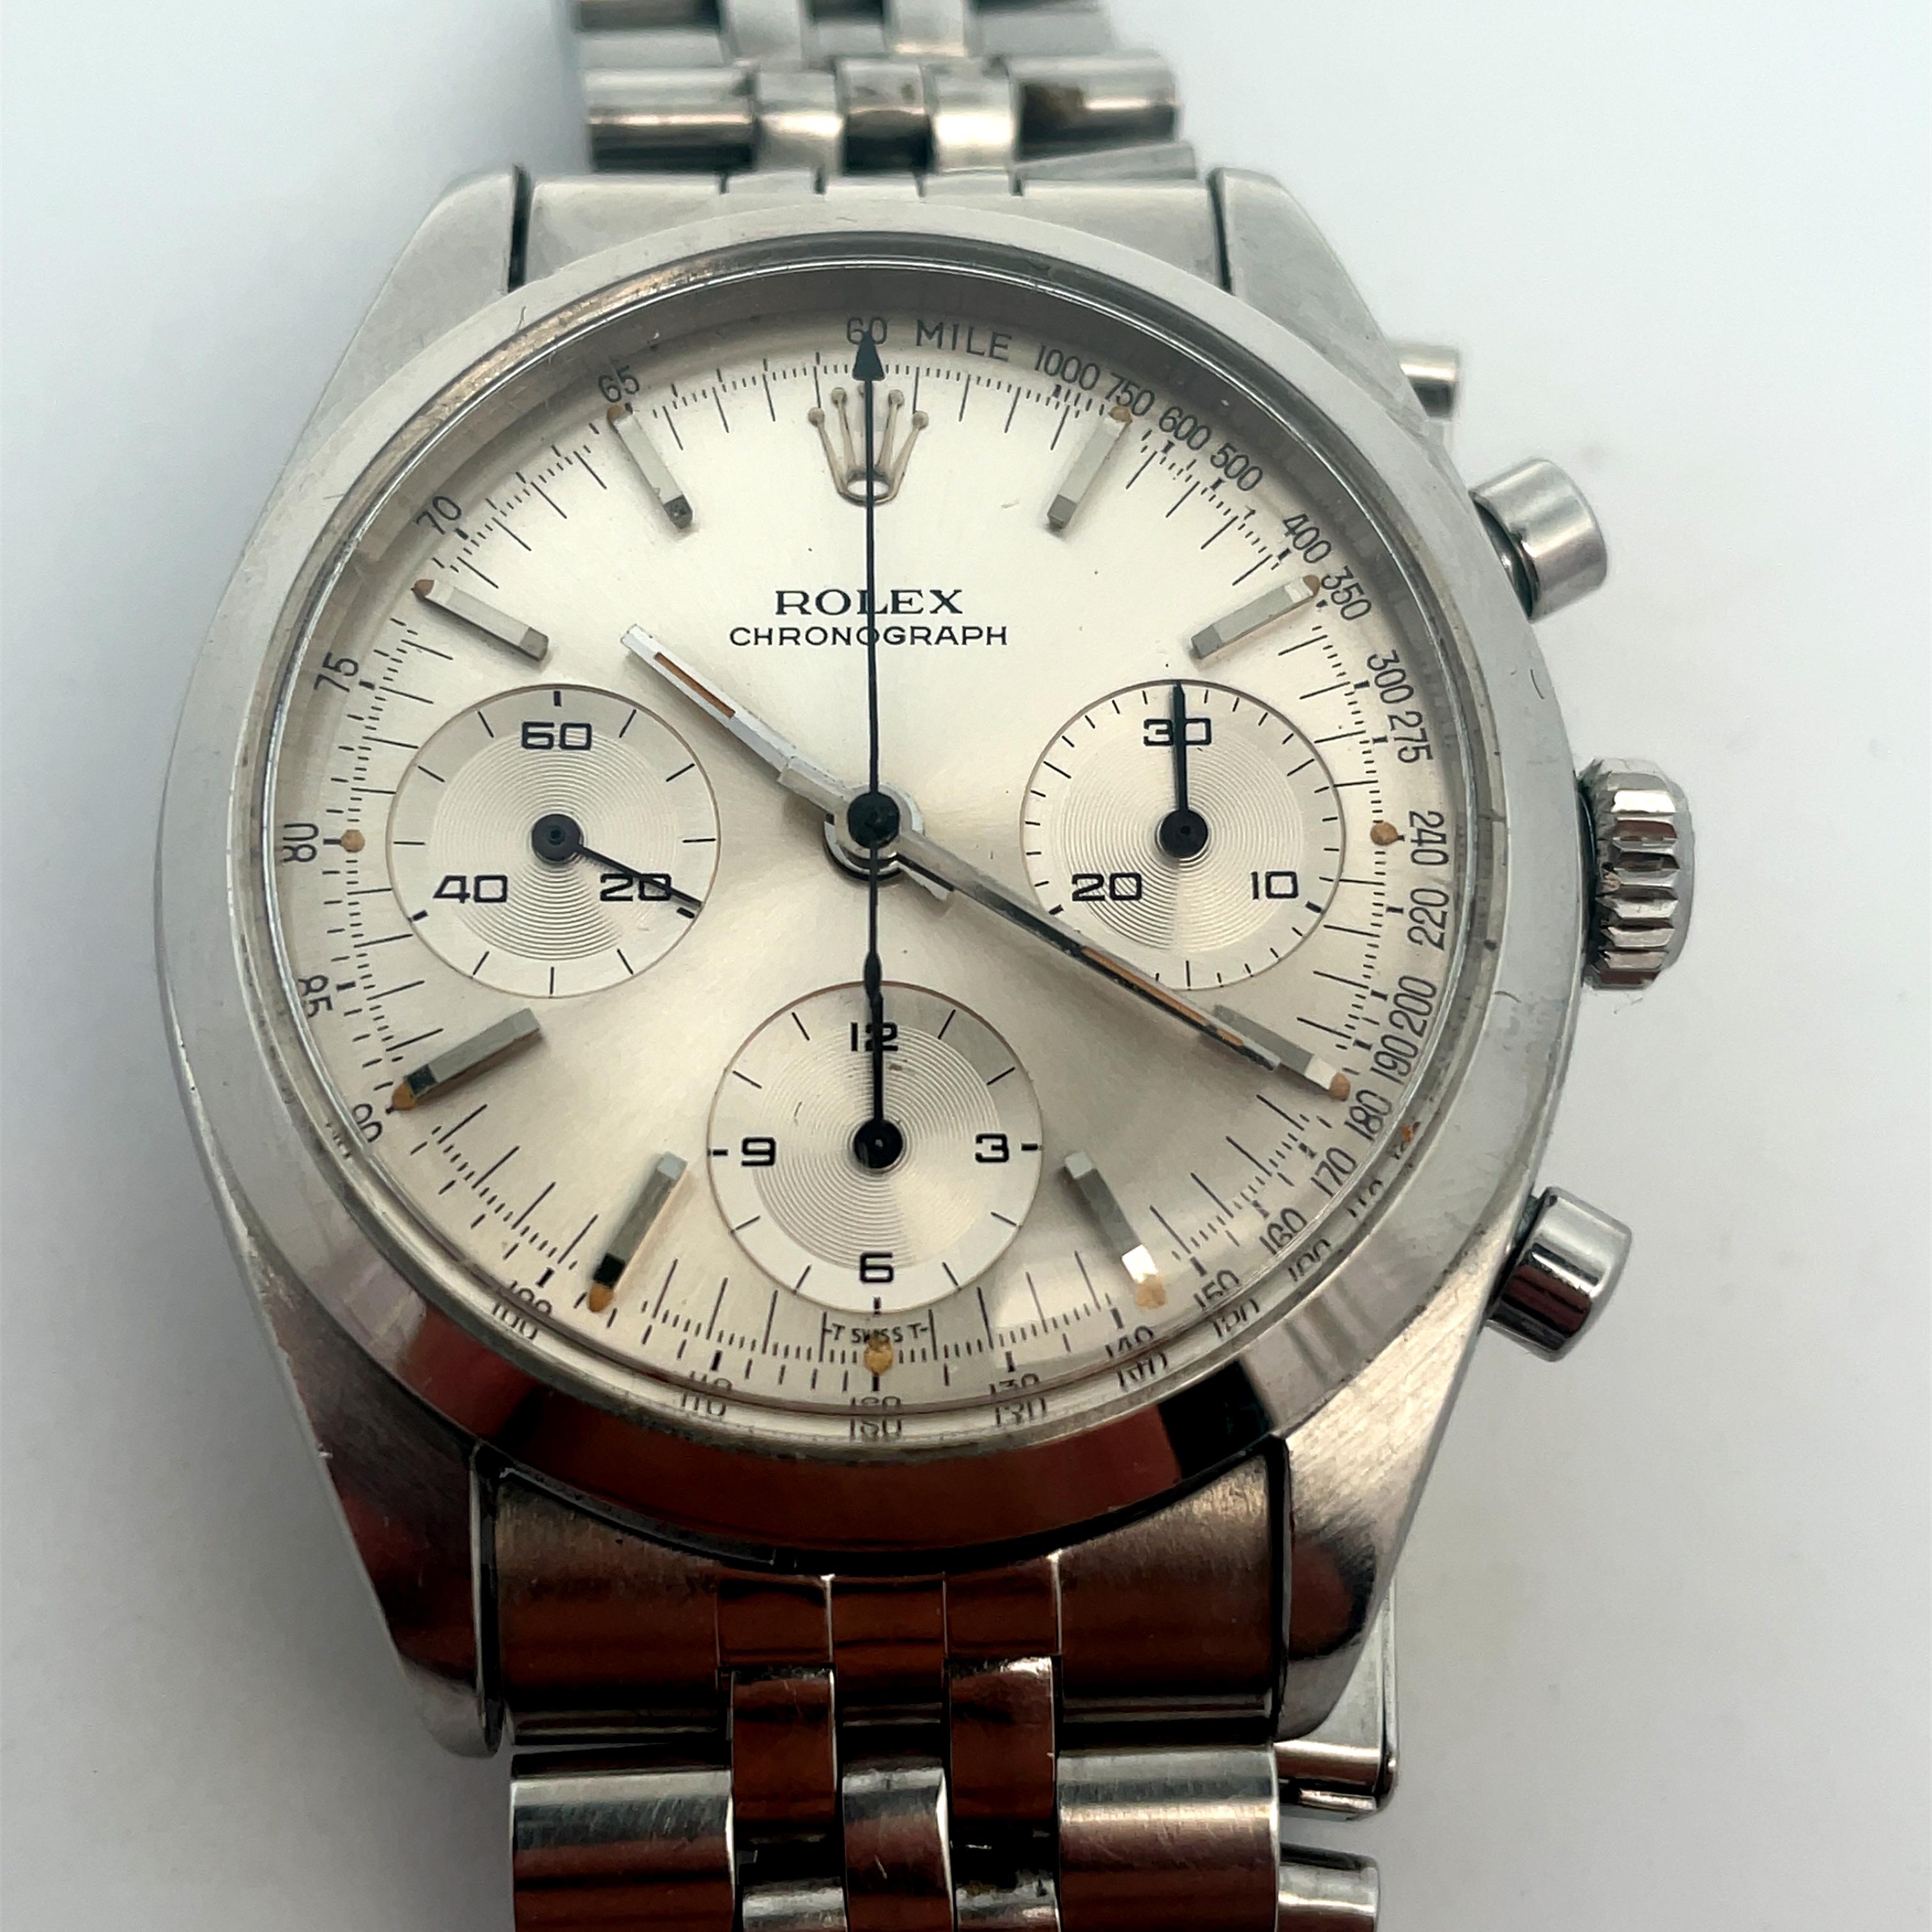 An extremely rare vintage Rolex Chronograph labelled as the ''Pre Daytona'' due to its production before the famous Daytona. Features a silver dial with applied hour markers and chronograph counters.
This watch is in stunning condition and has never